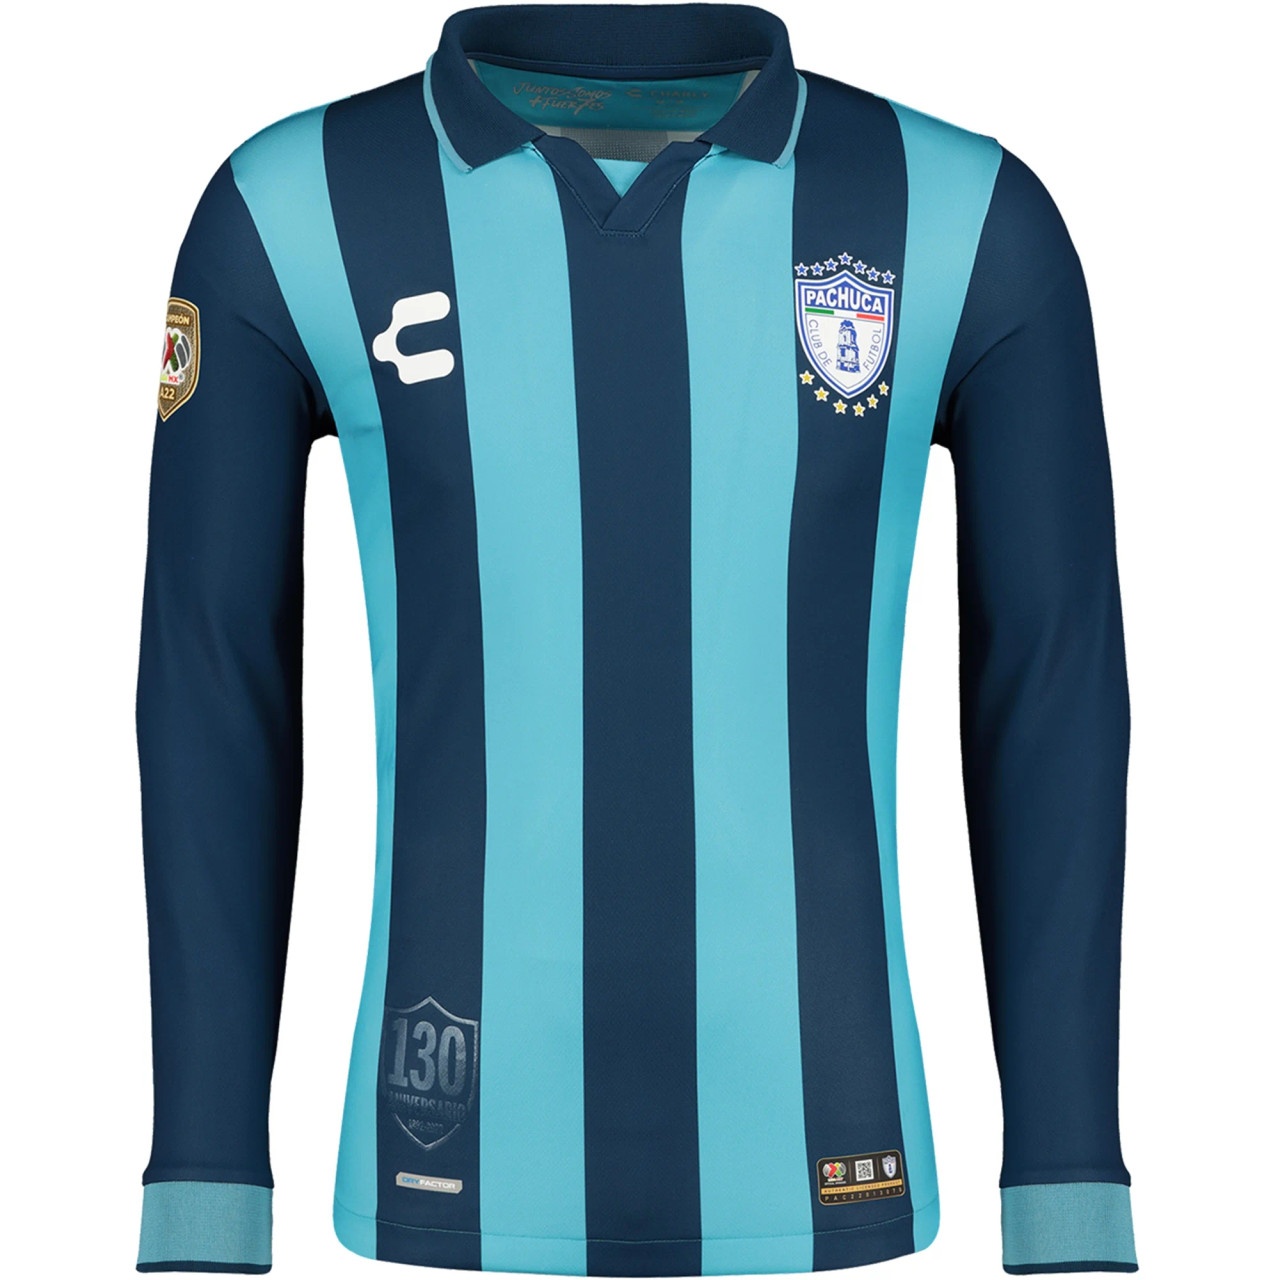 CHARLY PACHUCA LONG SLEEVE COMMEMORATIVE JERSEY